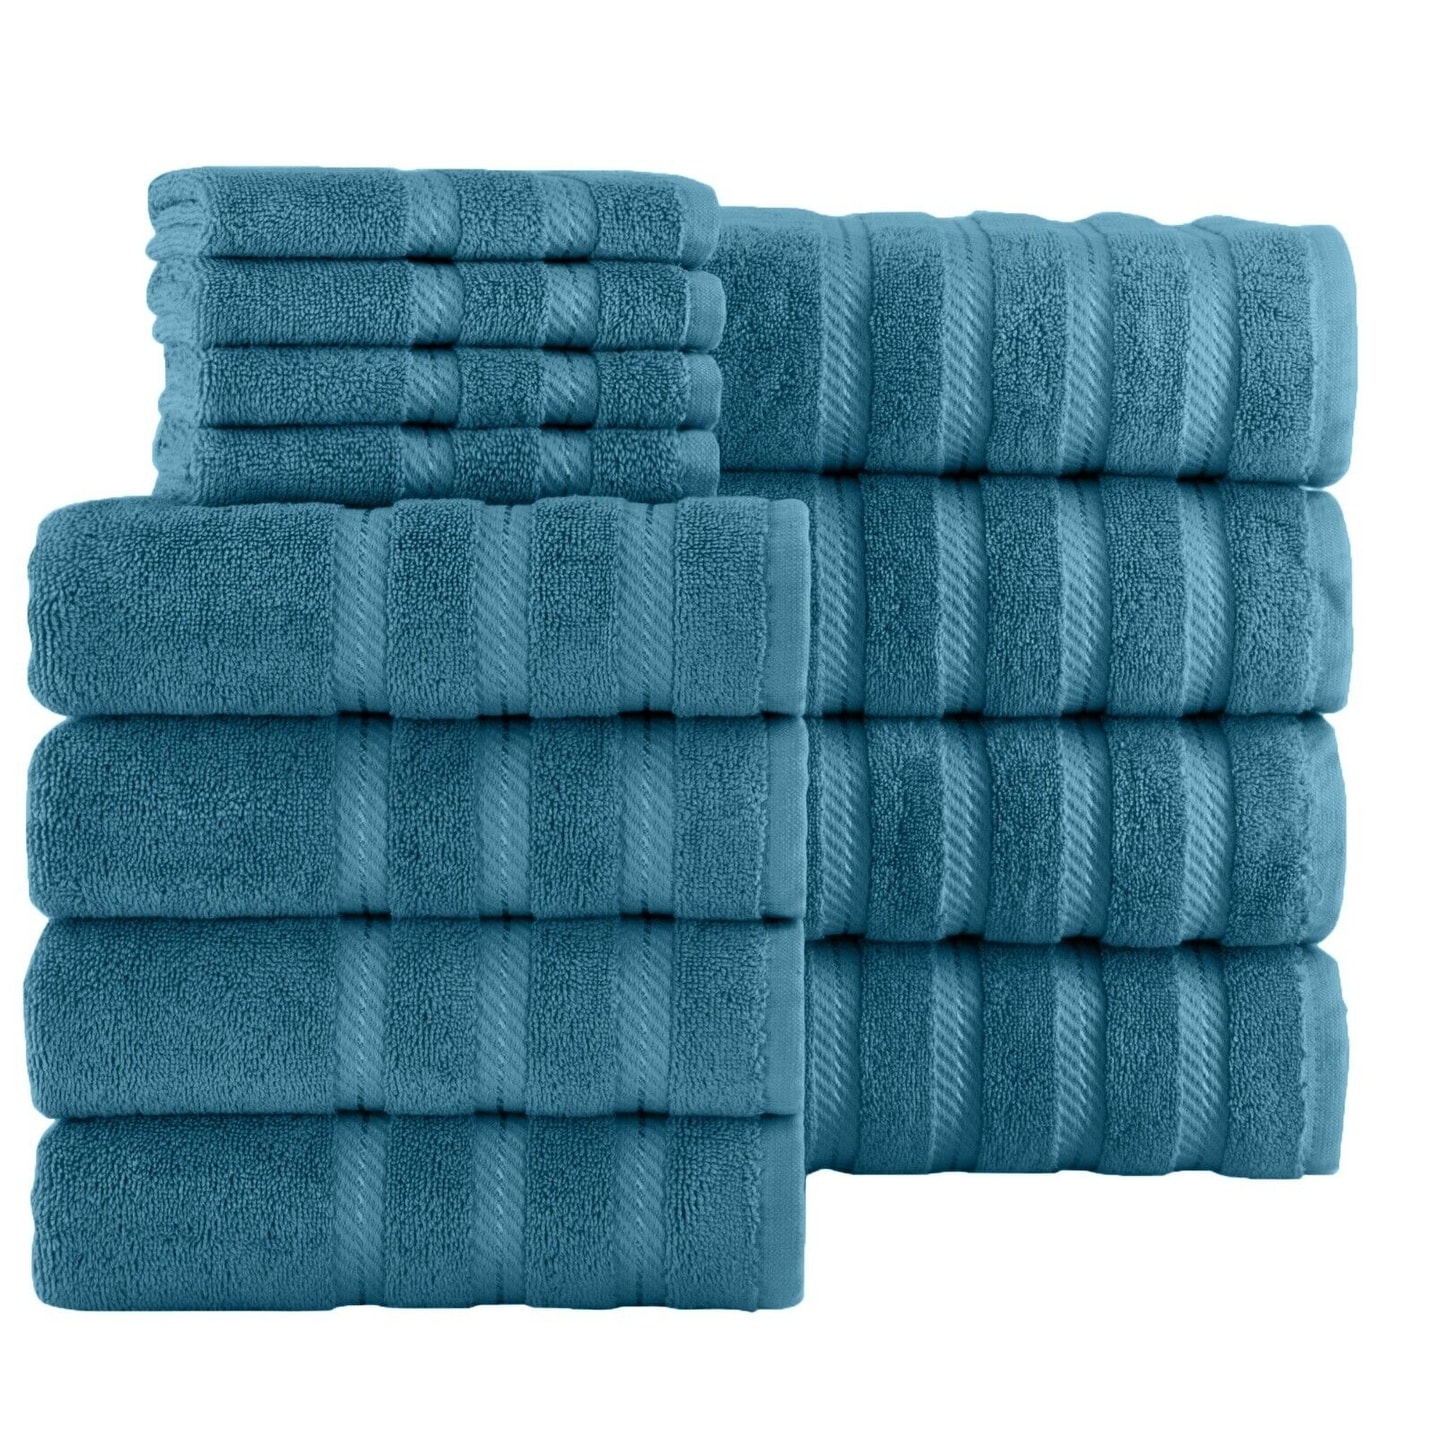 https://ak1.ostkcdn.com/images/products/is/images/direct/5392d641ca8e559e82eaa0035c481167fb6977a3/Antalya-Hotel-Collection-Turkish-Cotton-Bathroom-Towel-12-Pc-Family-Set.jpg